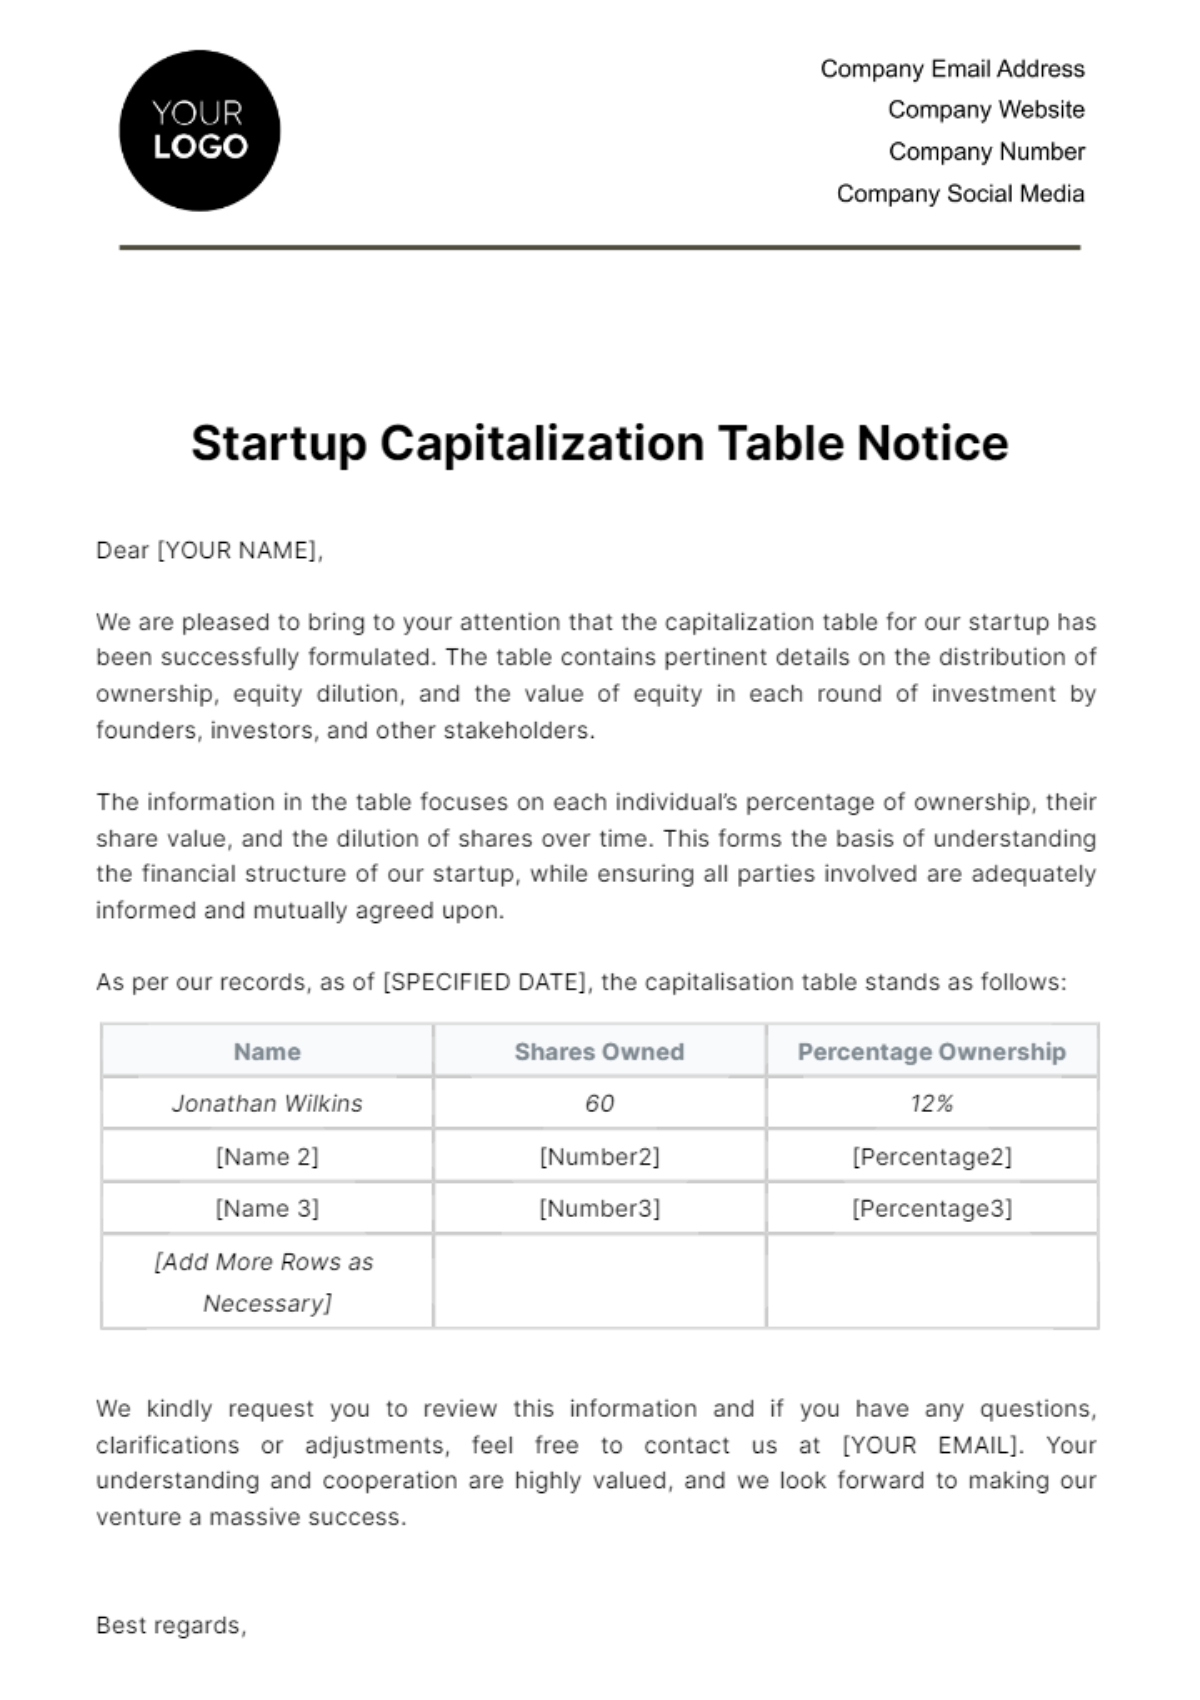 Startup Capitalization Table Notice Template